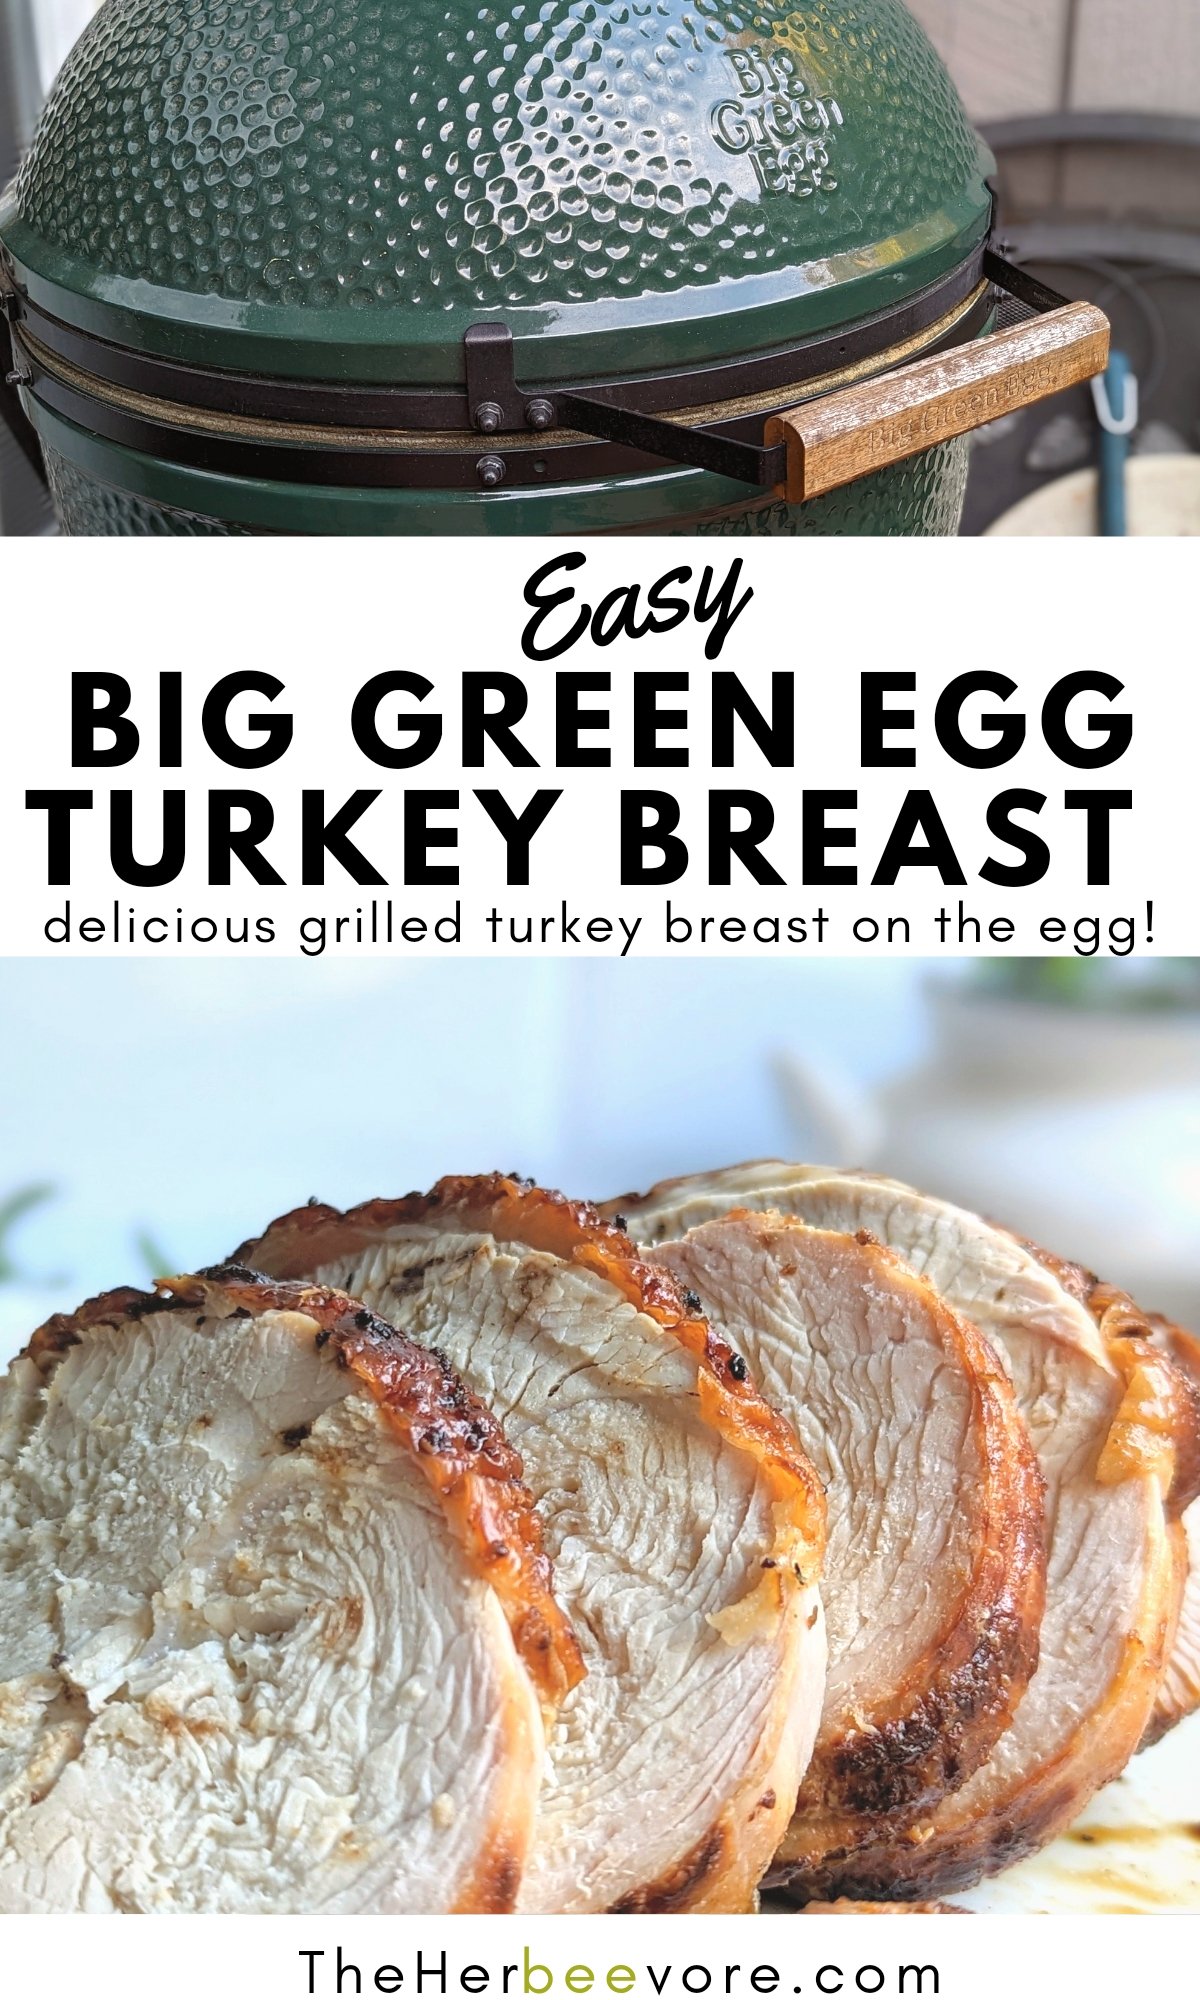 big green egg turkey breast recipe grilled turkey for thanksgiving or christmas holiday